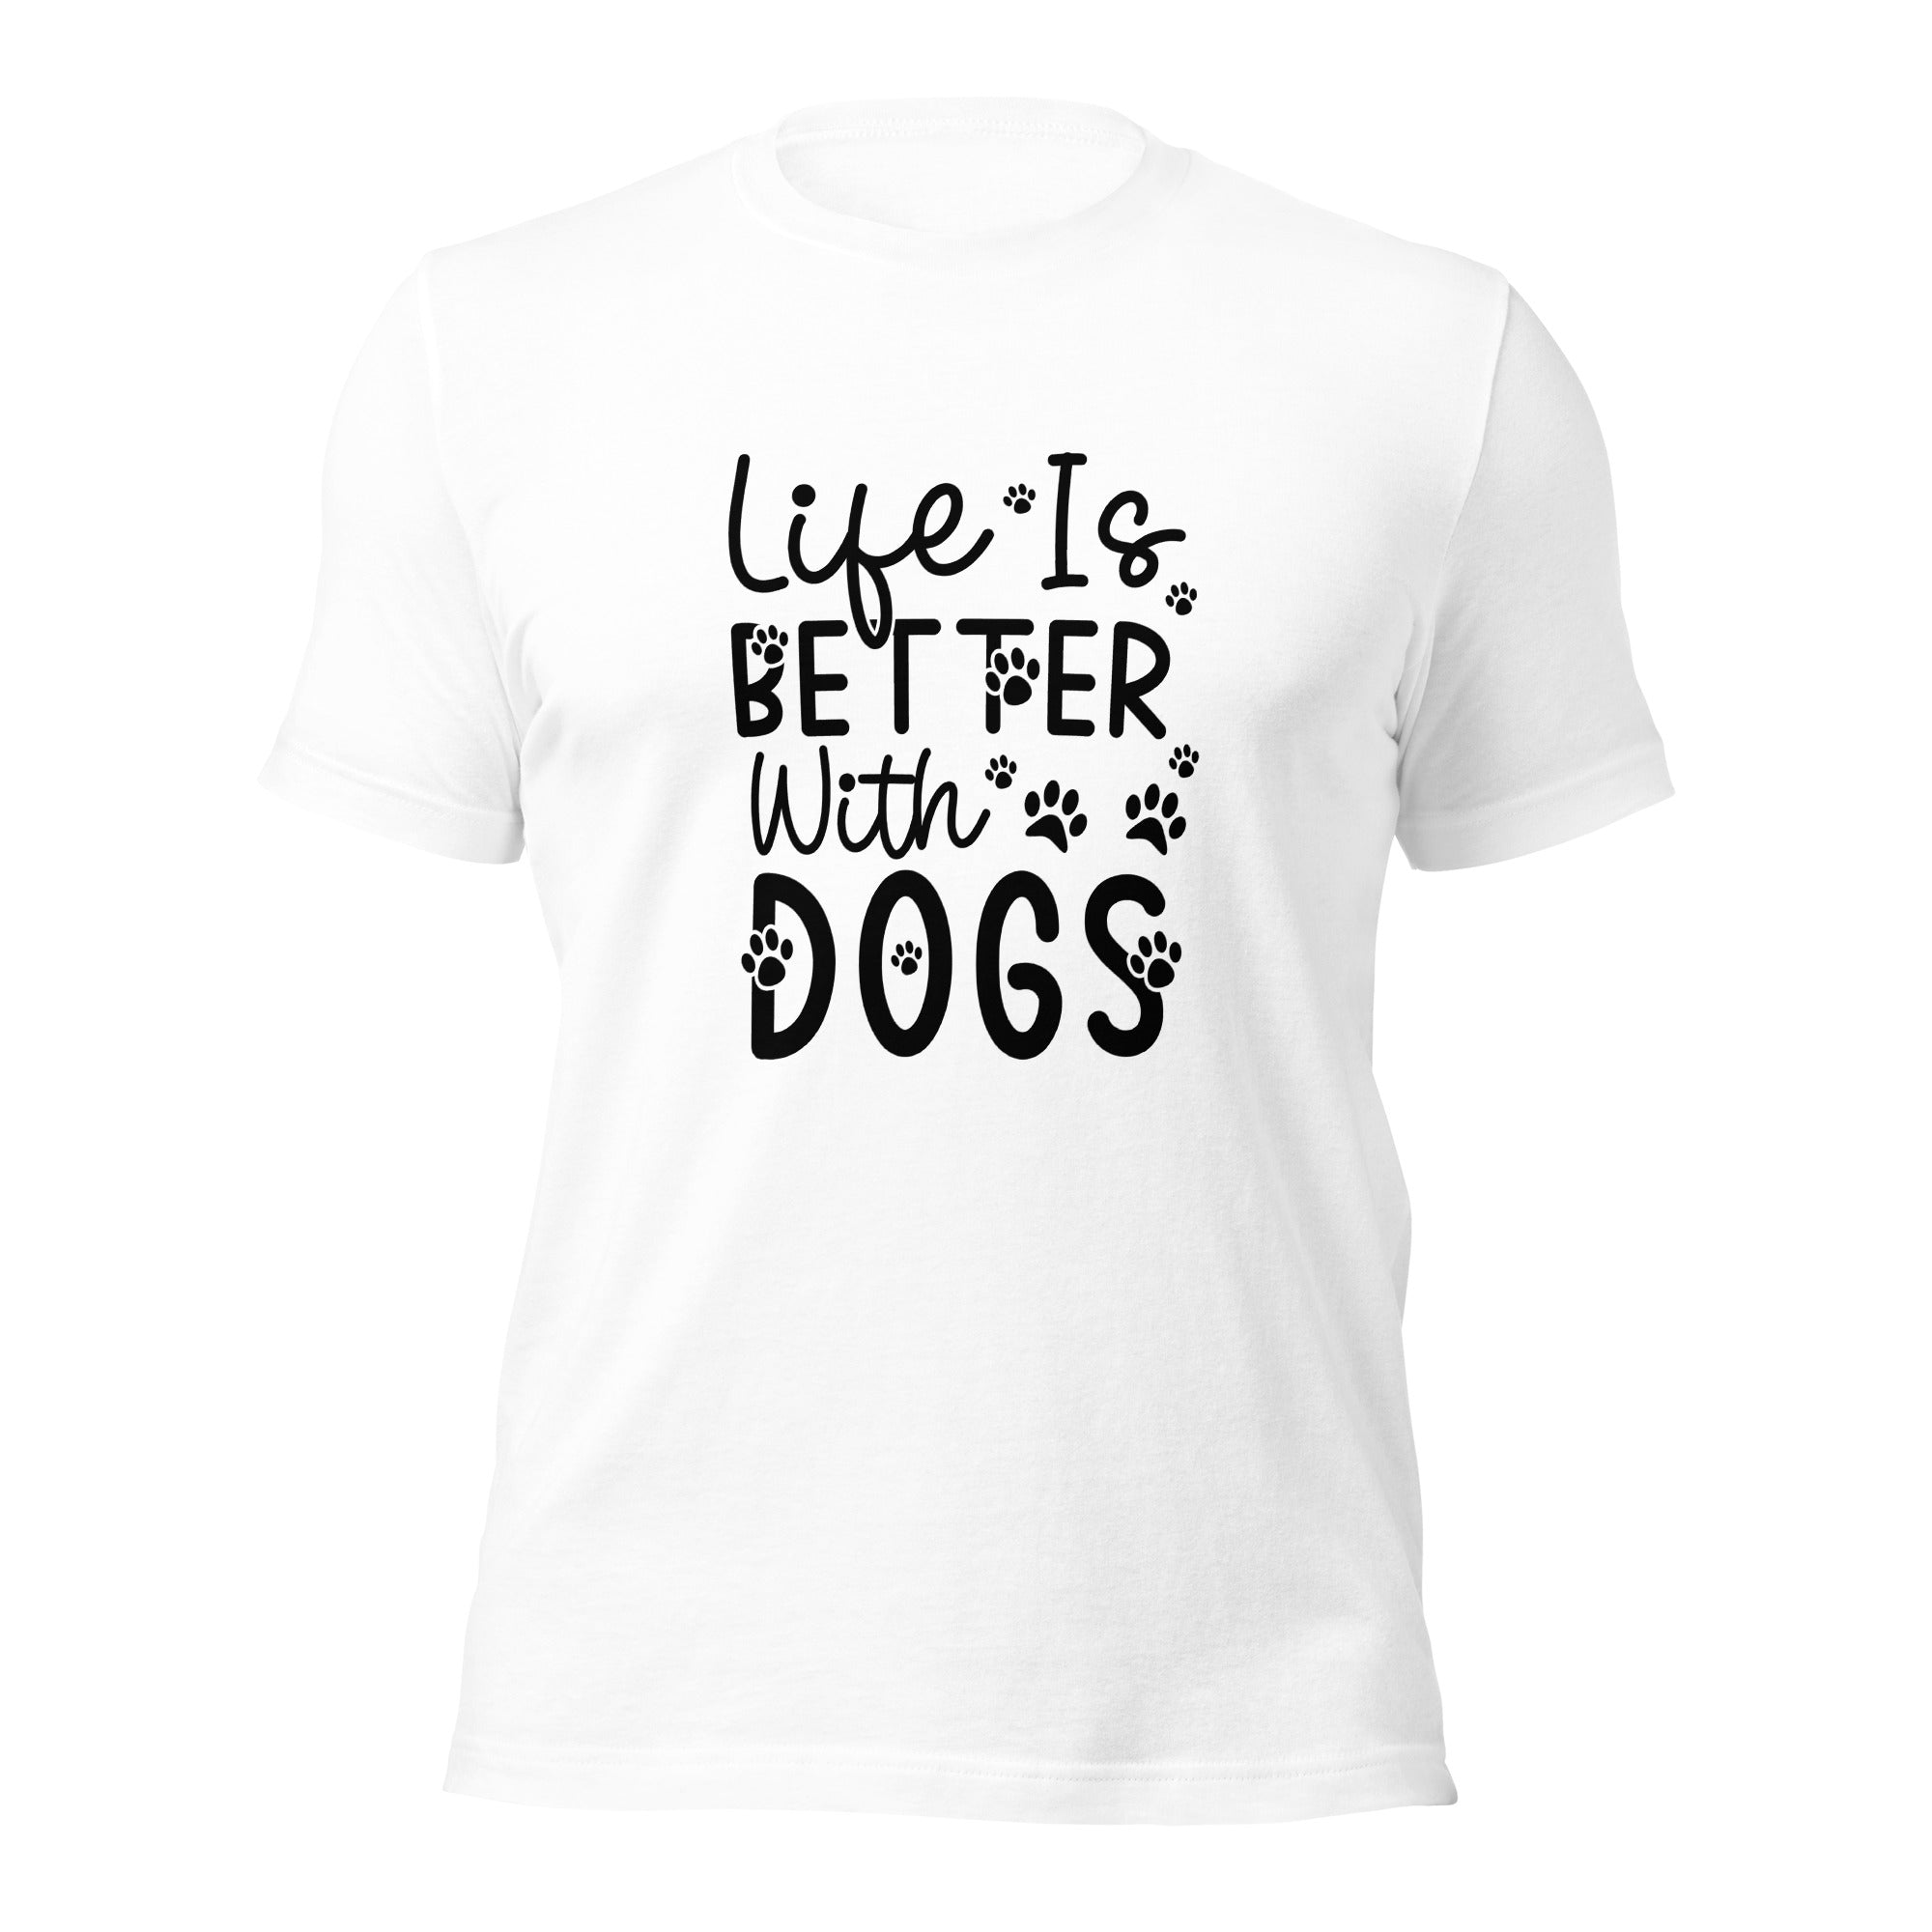 Unisex t-shirt- Life Is Better With Dogs